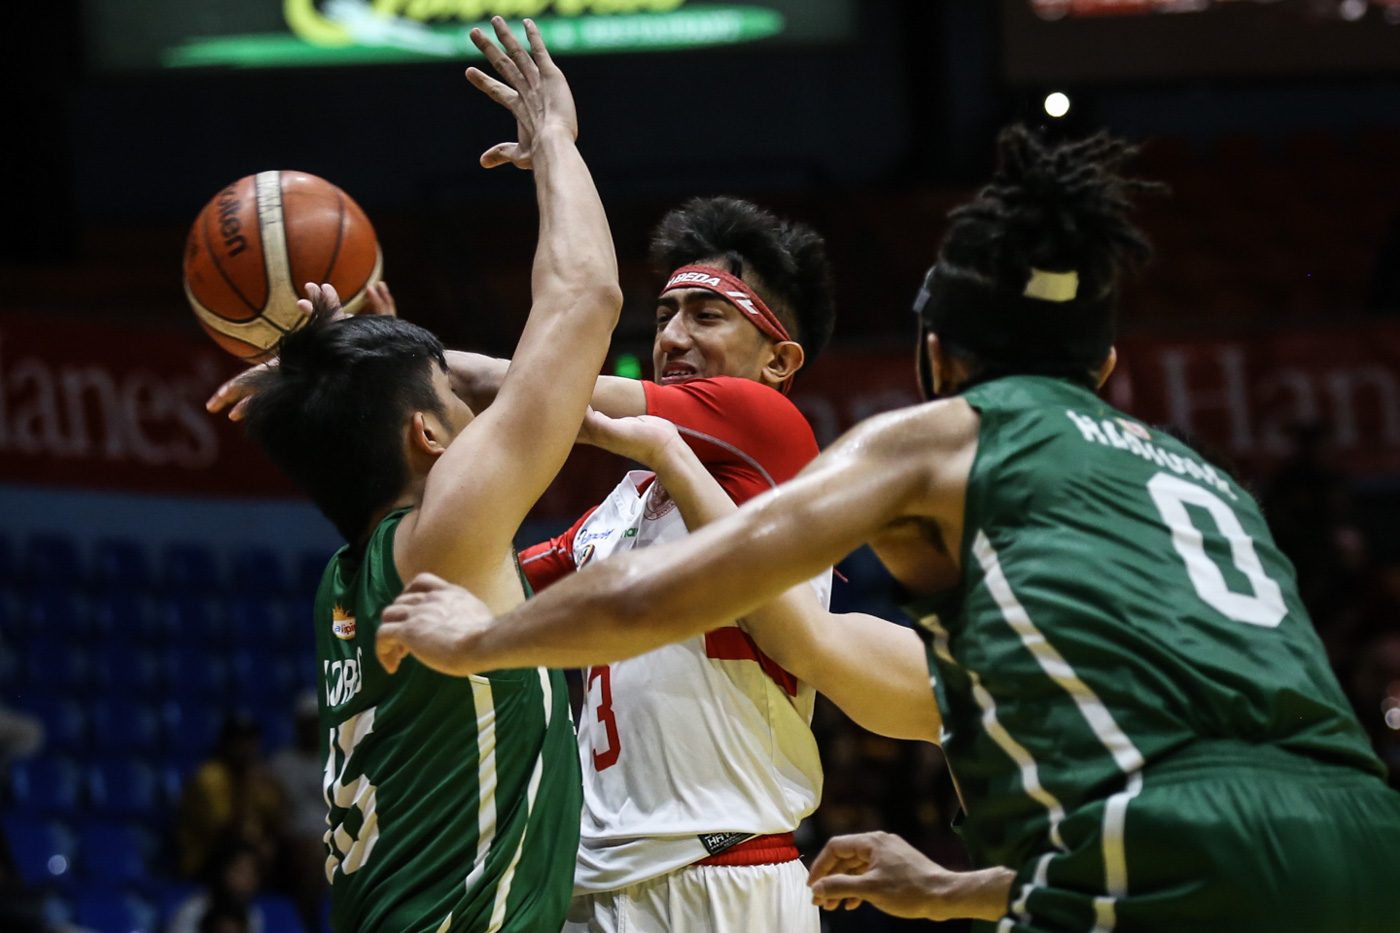 Evan Nelle wants to ‘spread his wings’ in move to La Salle